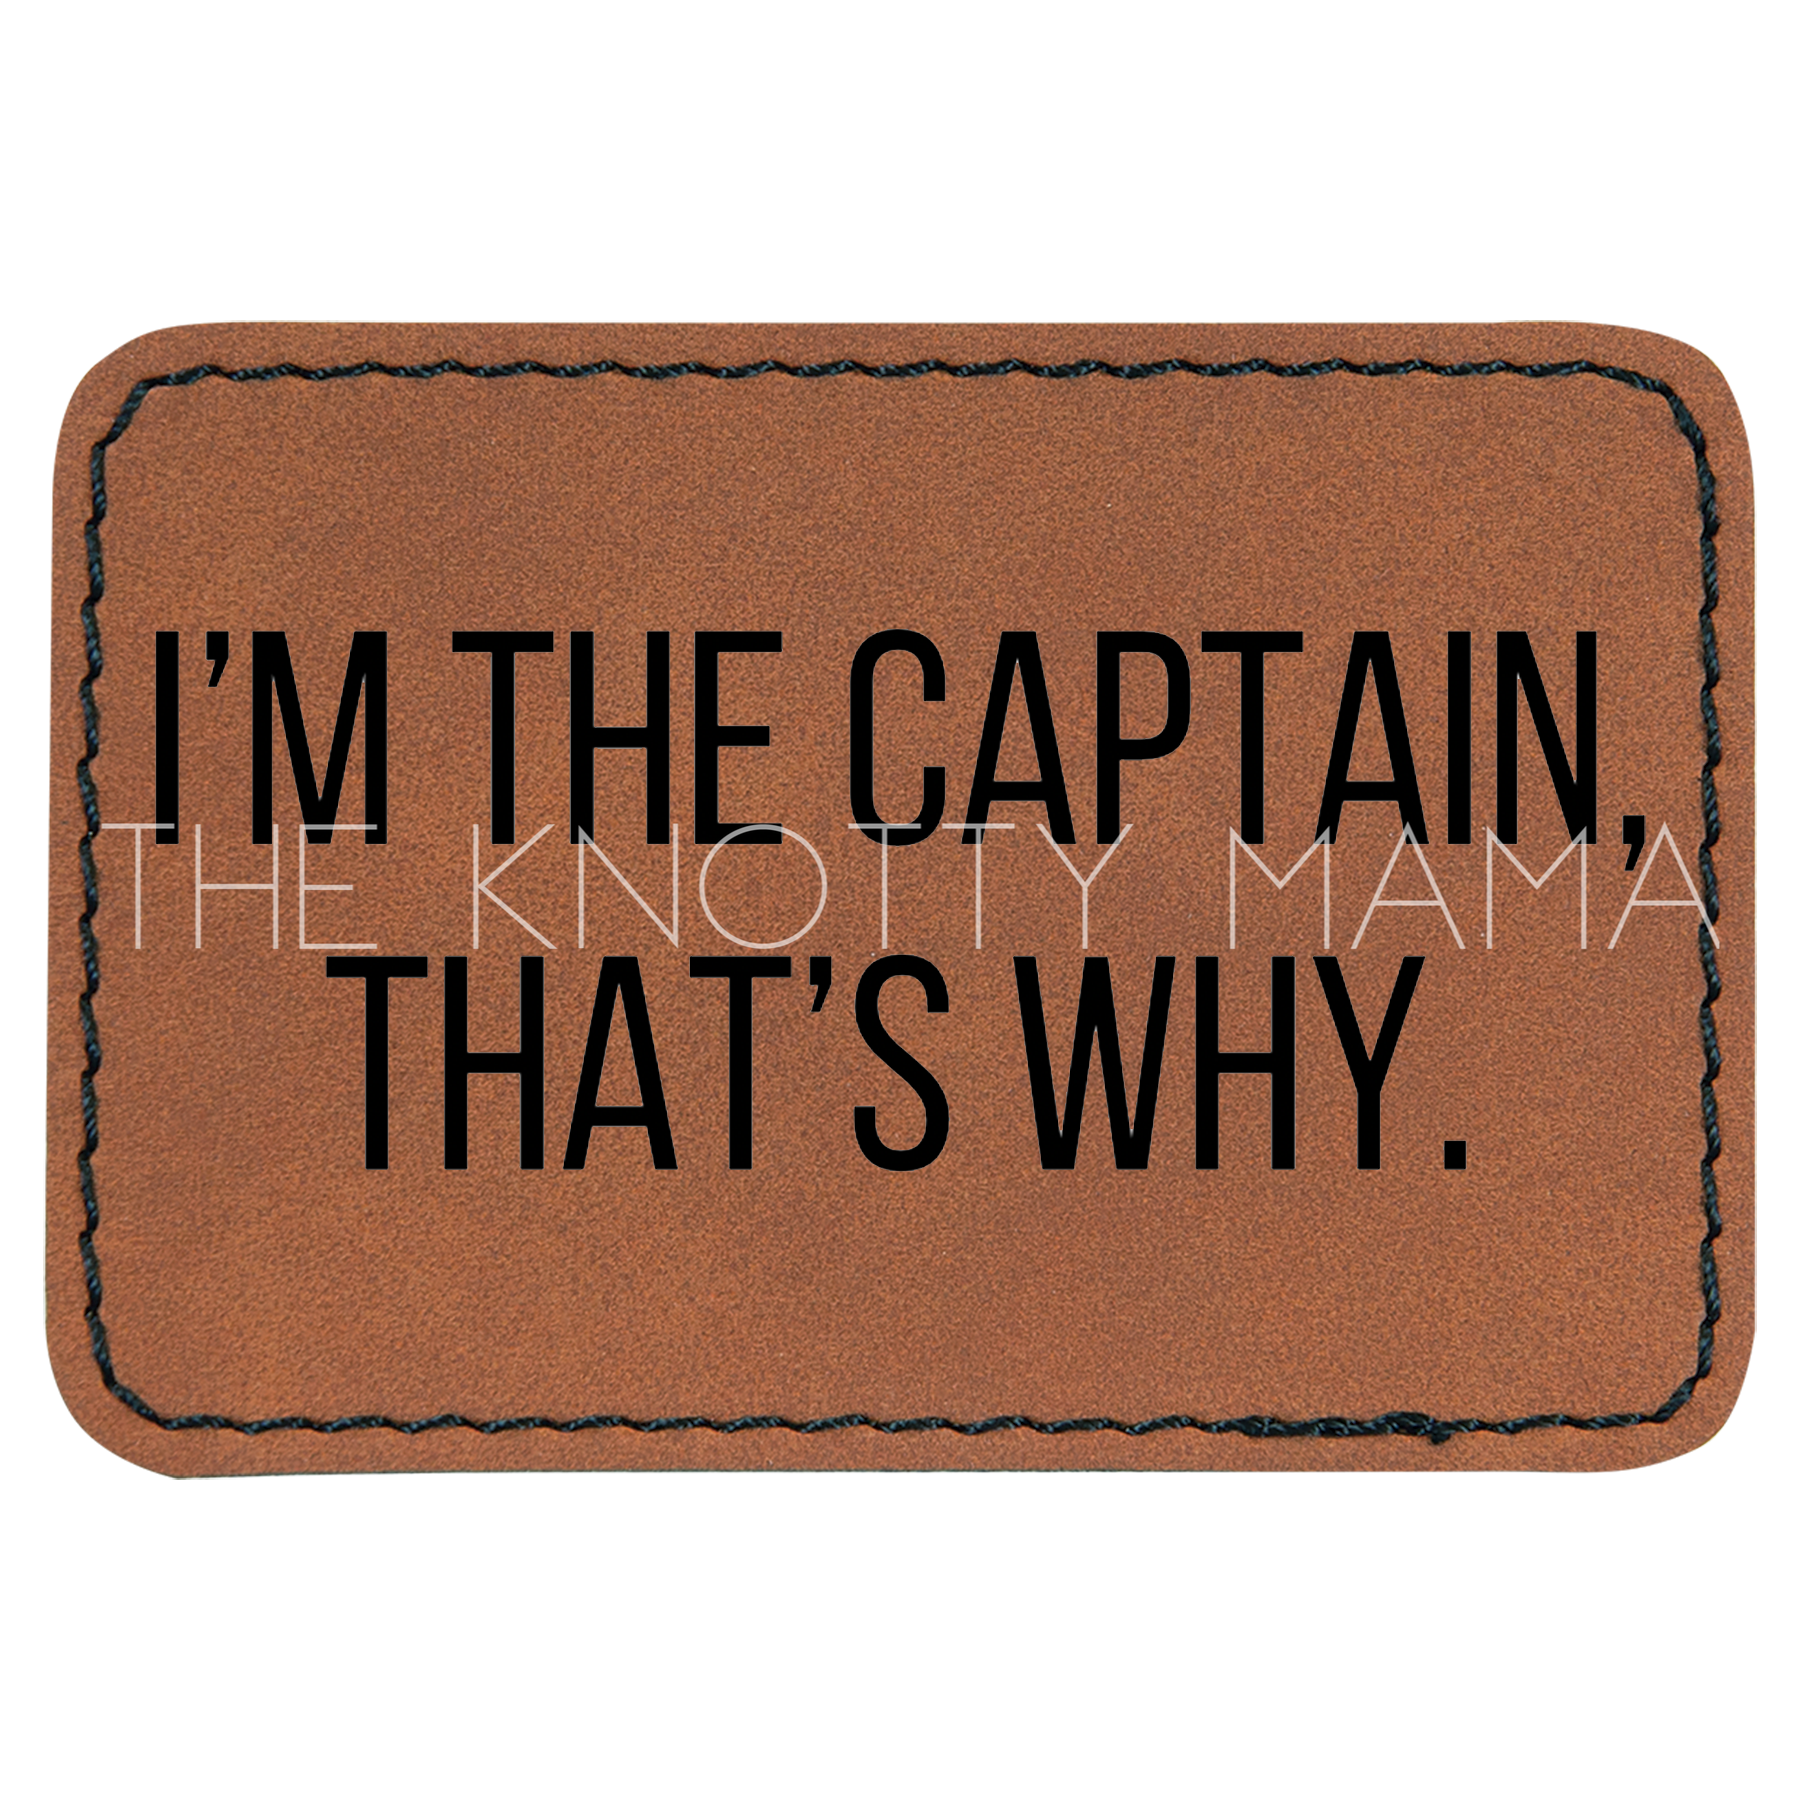 I'm The Captain That's Why Patch